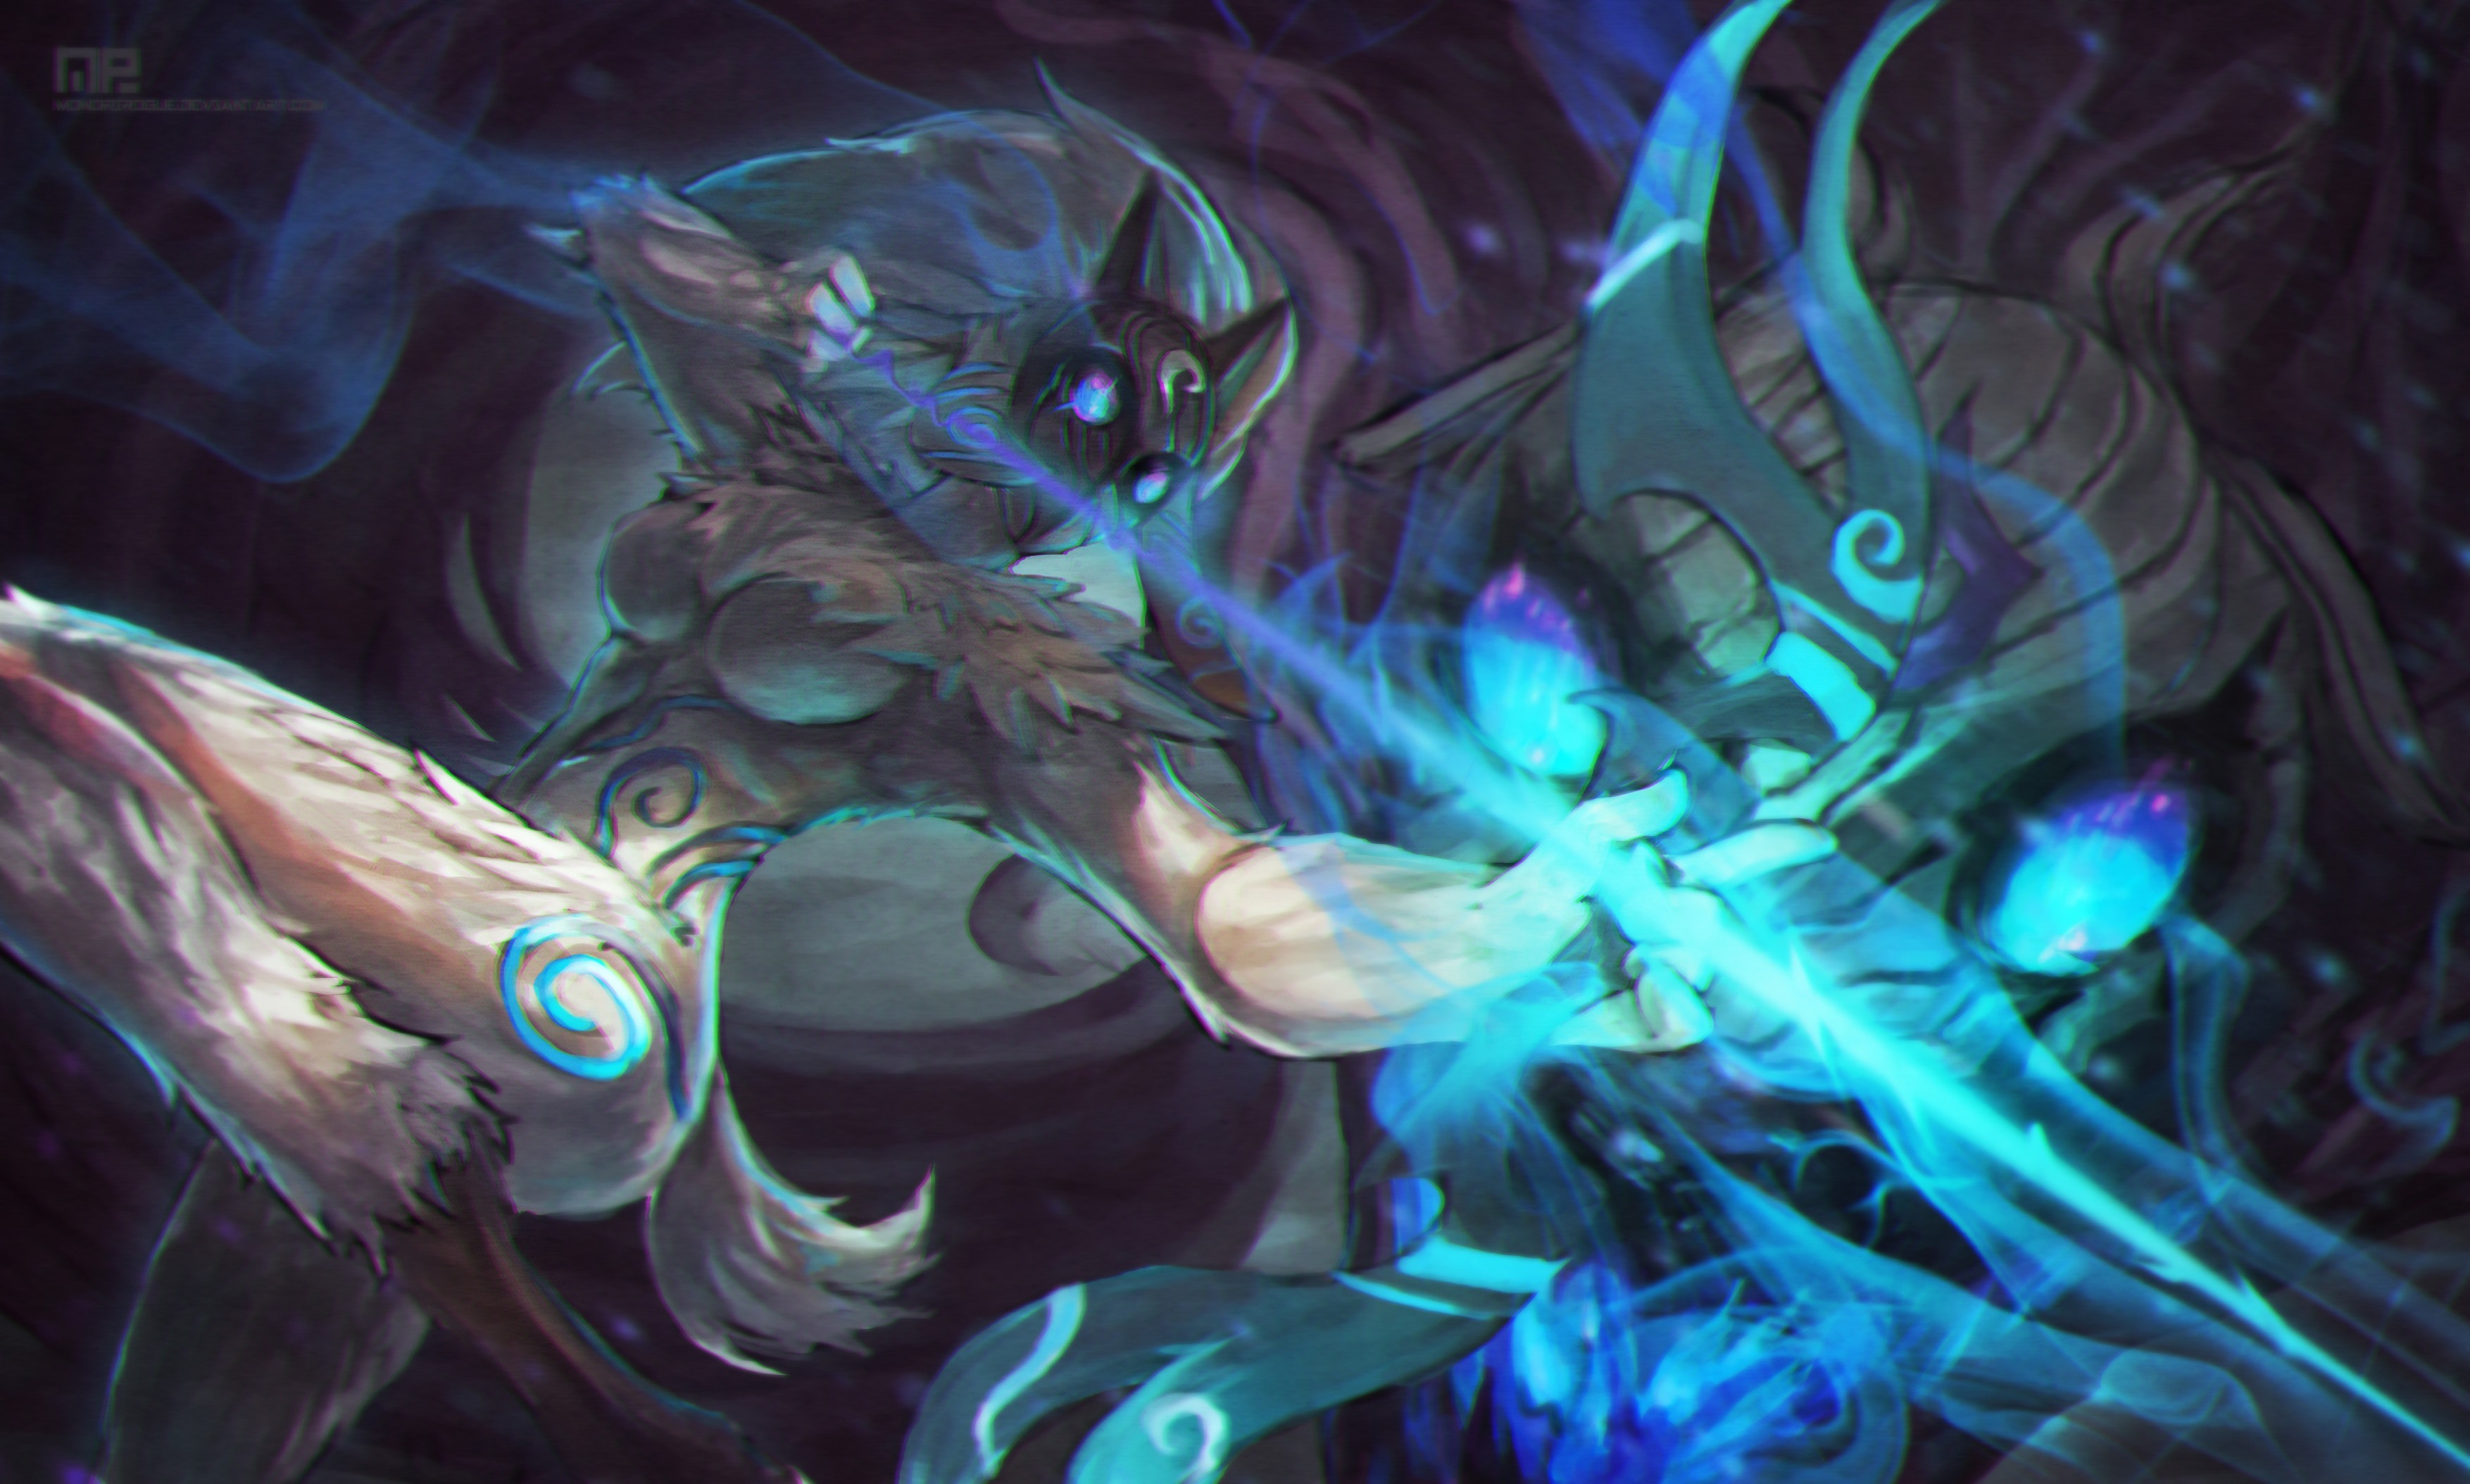 General 3508x2108 League of Legends Kindred Nocturne cyan Kindred (League of Legends) Nocturne (League of Legends) PC gaming video game characters fan art DeviantArt